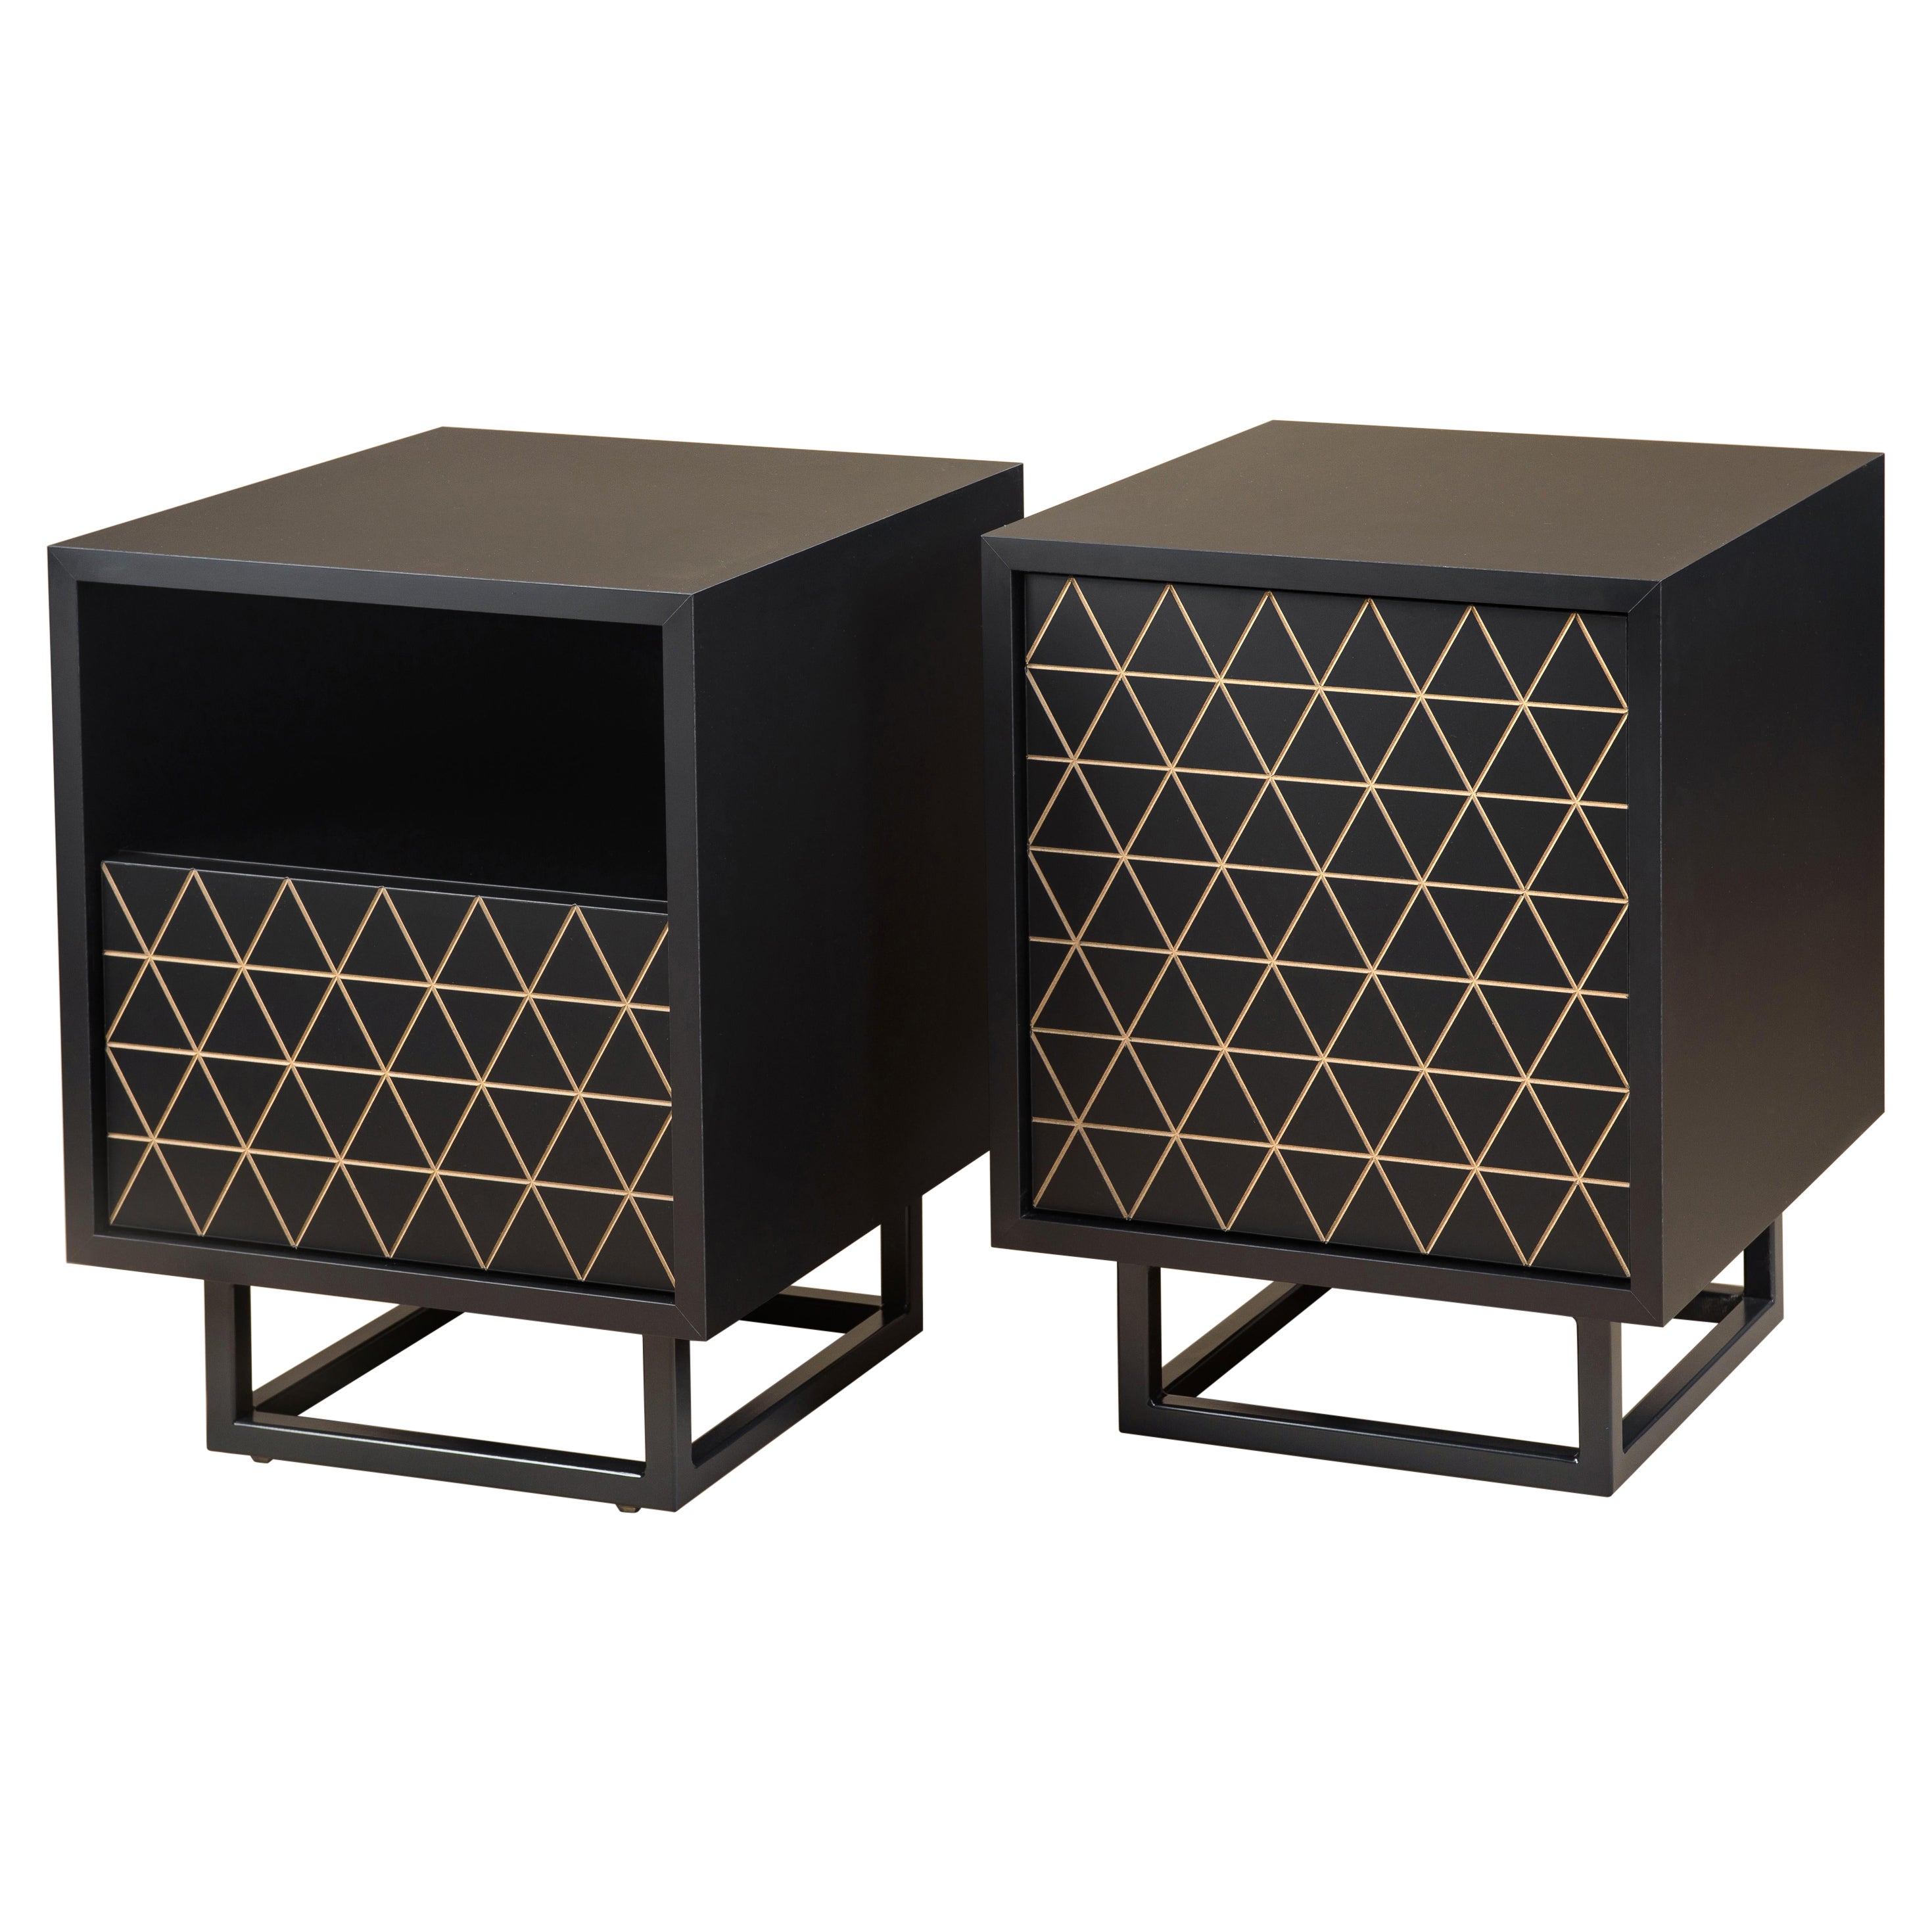 Set of 2 Lowbo XS Nightstands by Phormy For Sale